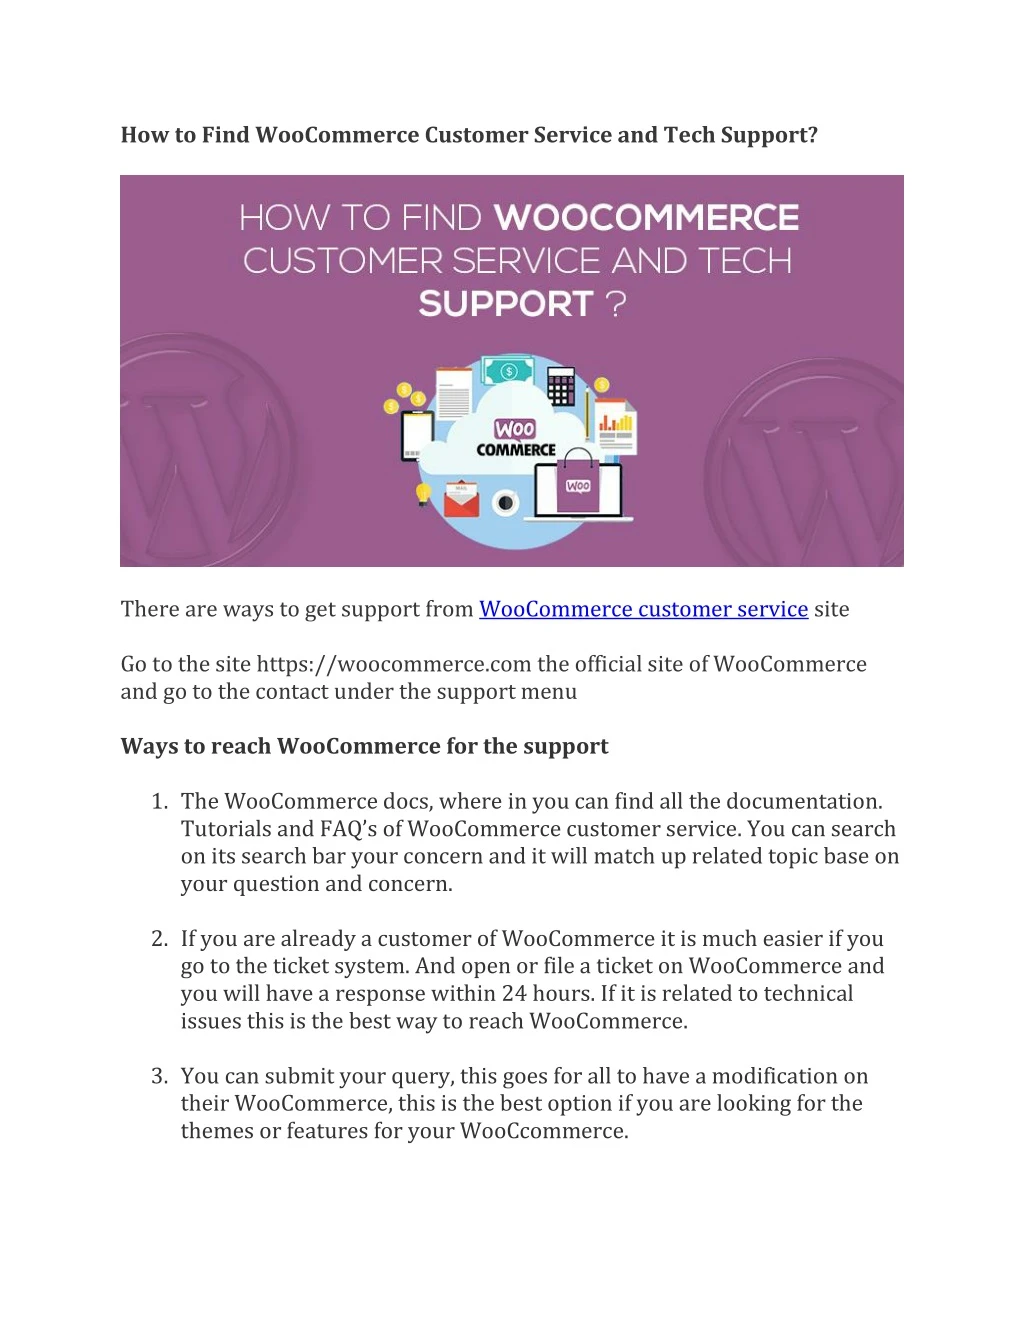 how to find woocommerce customer service and tech